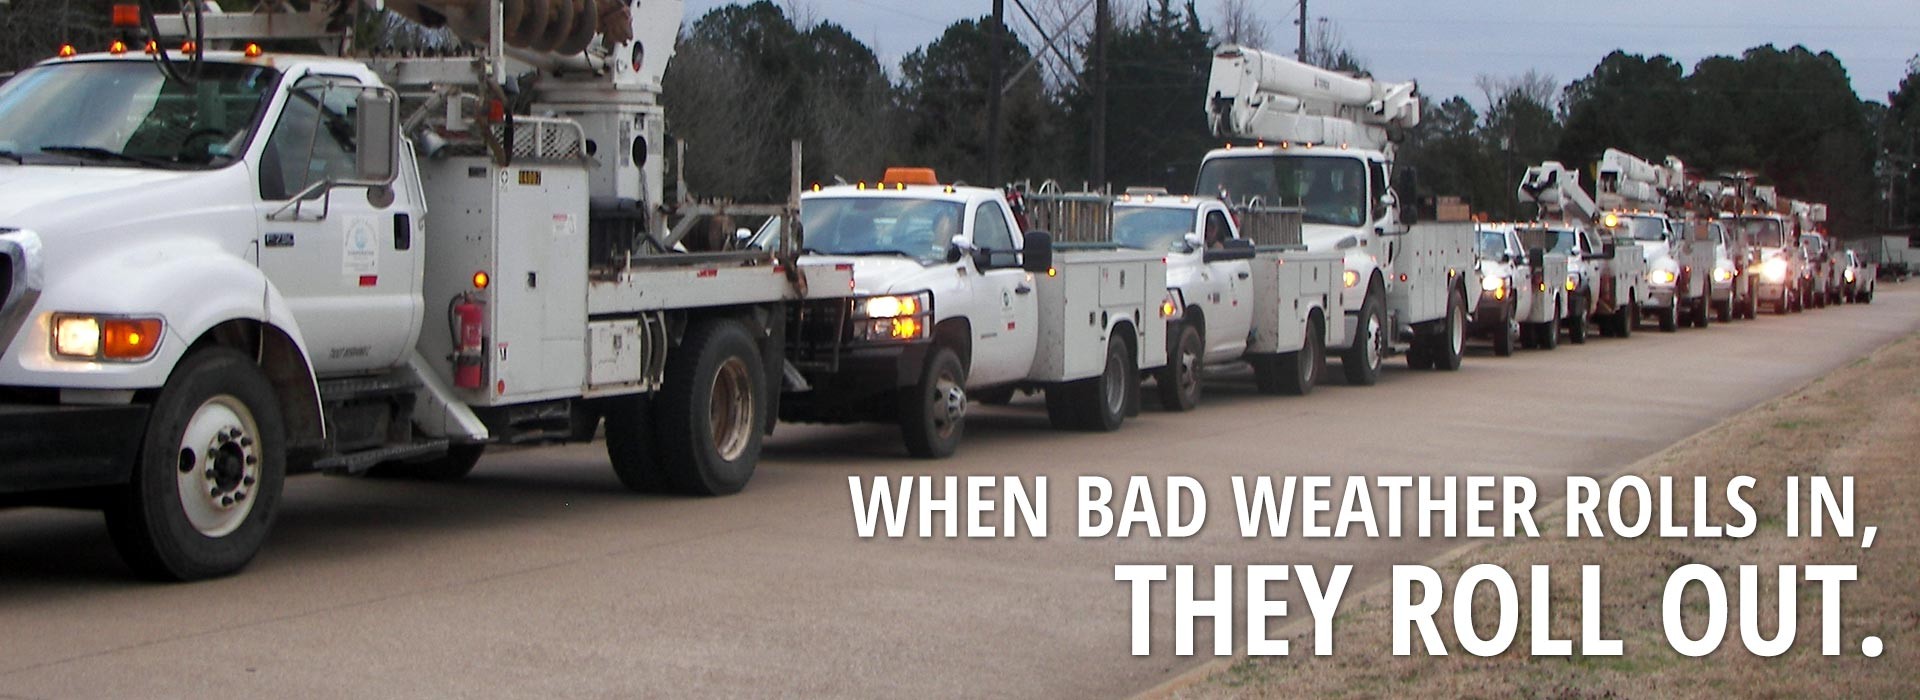 When the bad weather rolls in, they roll out. (Power trucks)